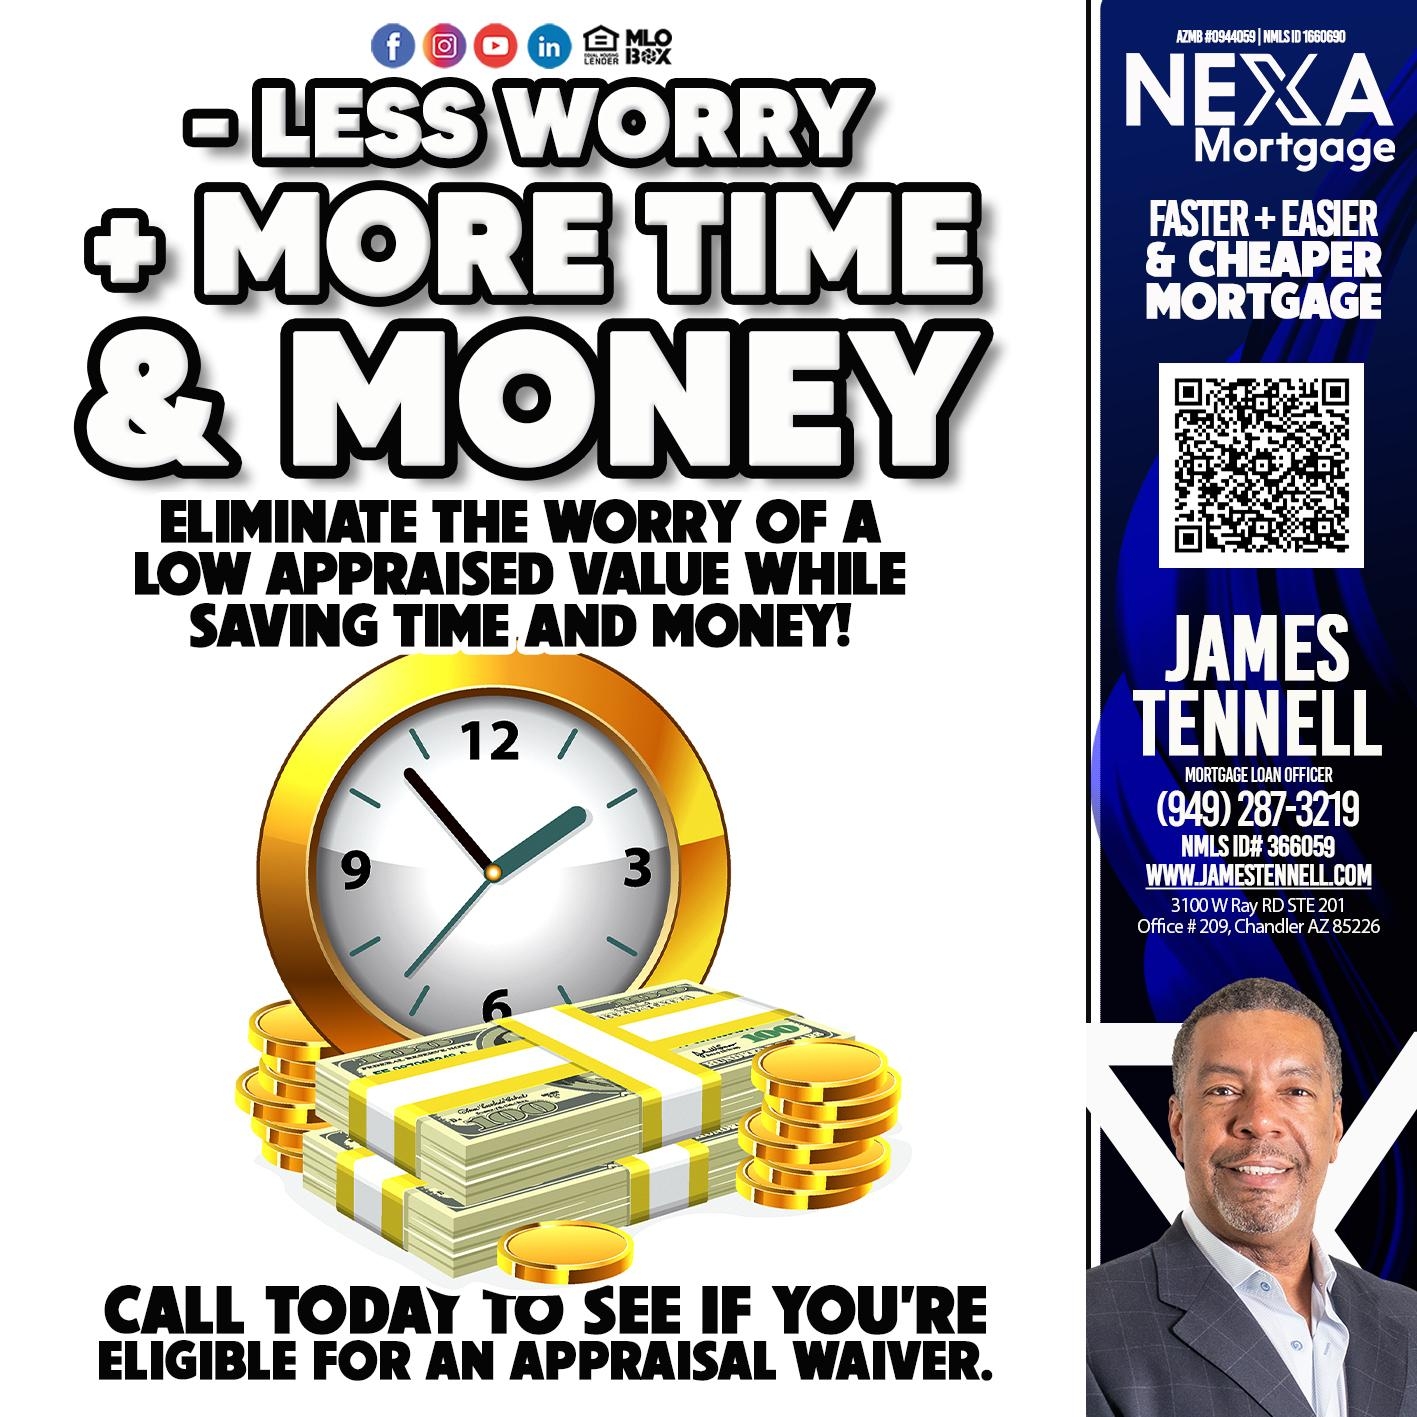 LESS WORRY - James Tennell - Mortgage Loan Originator